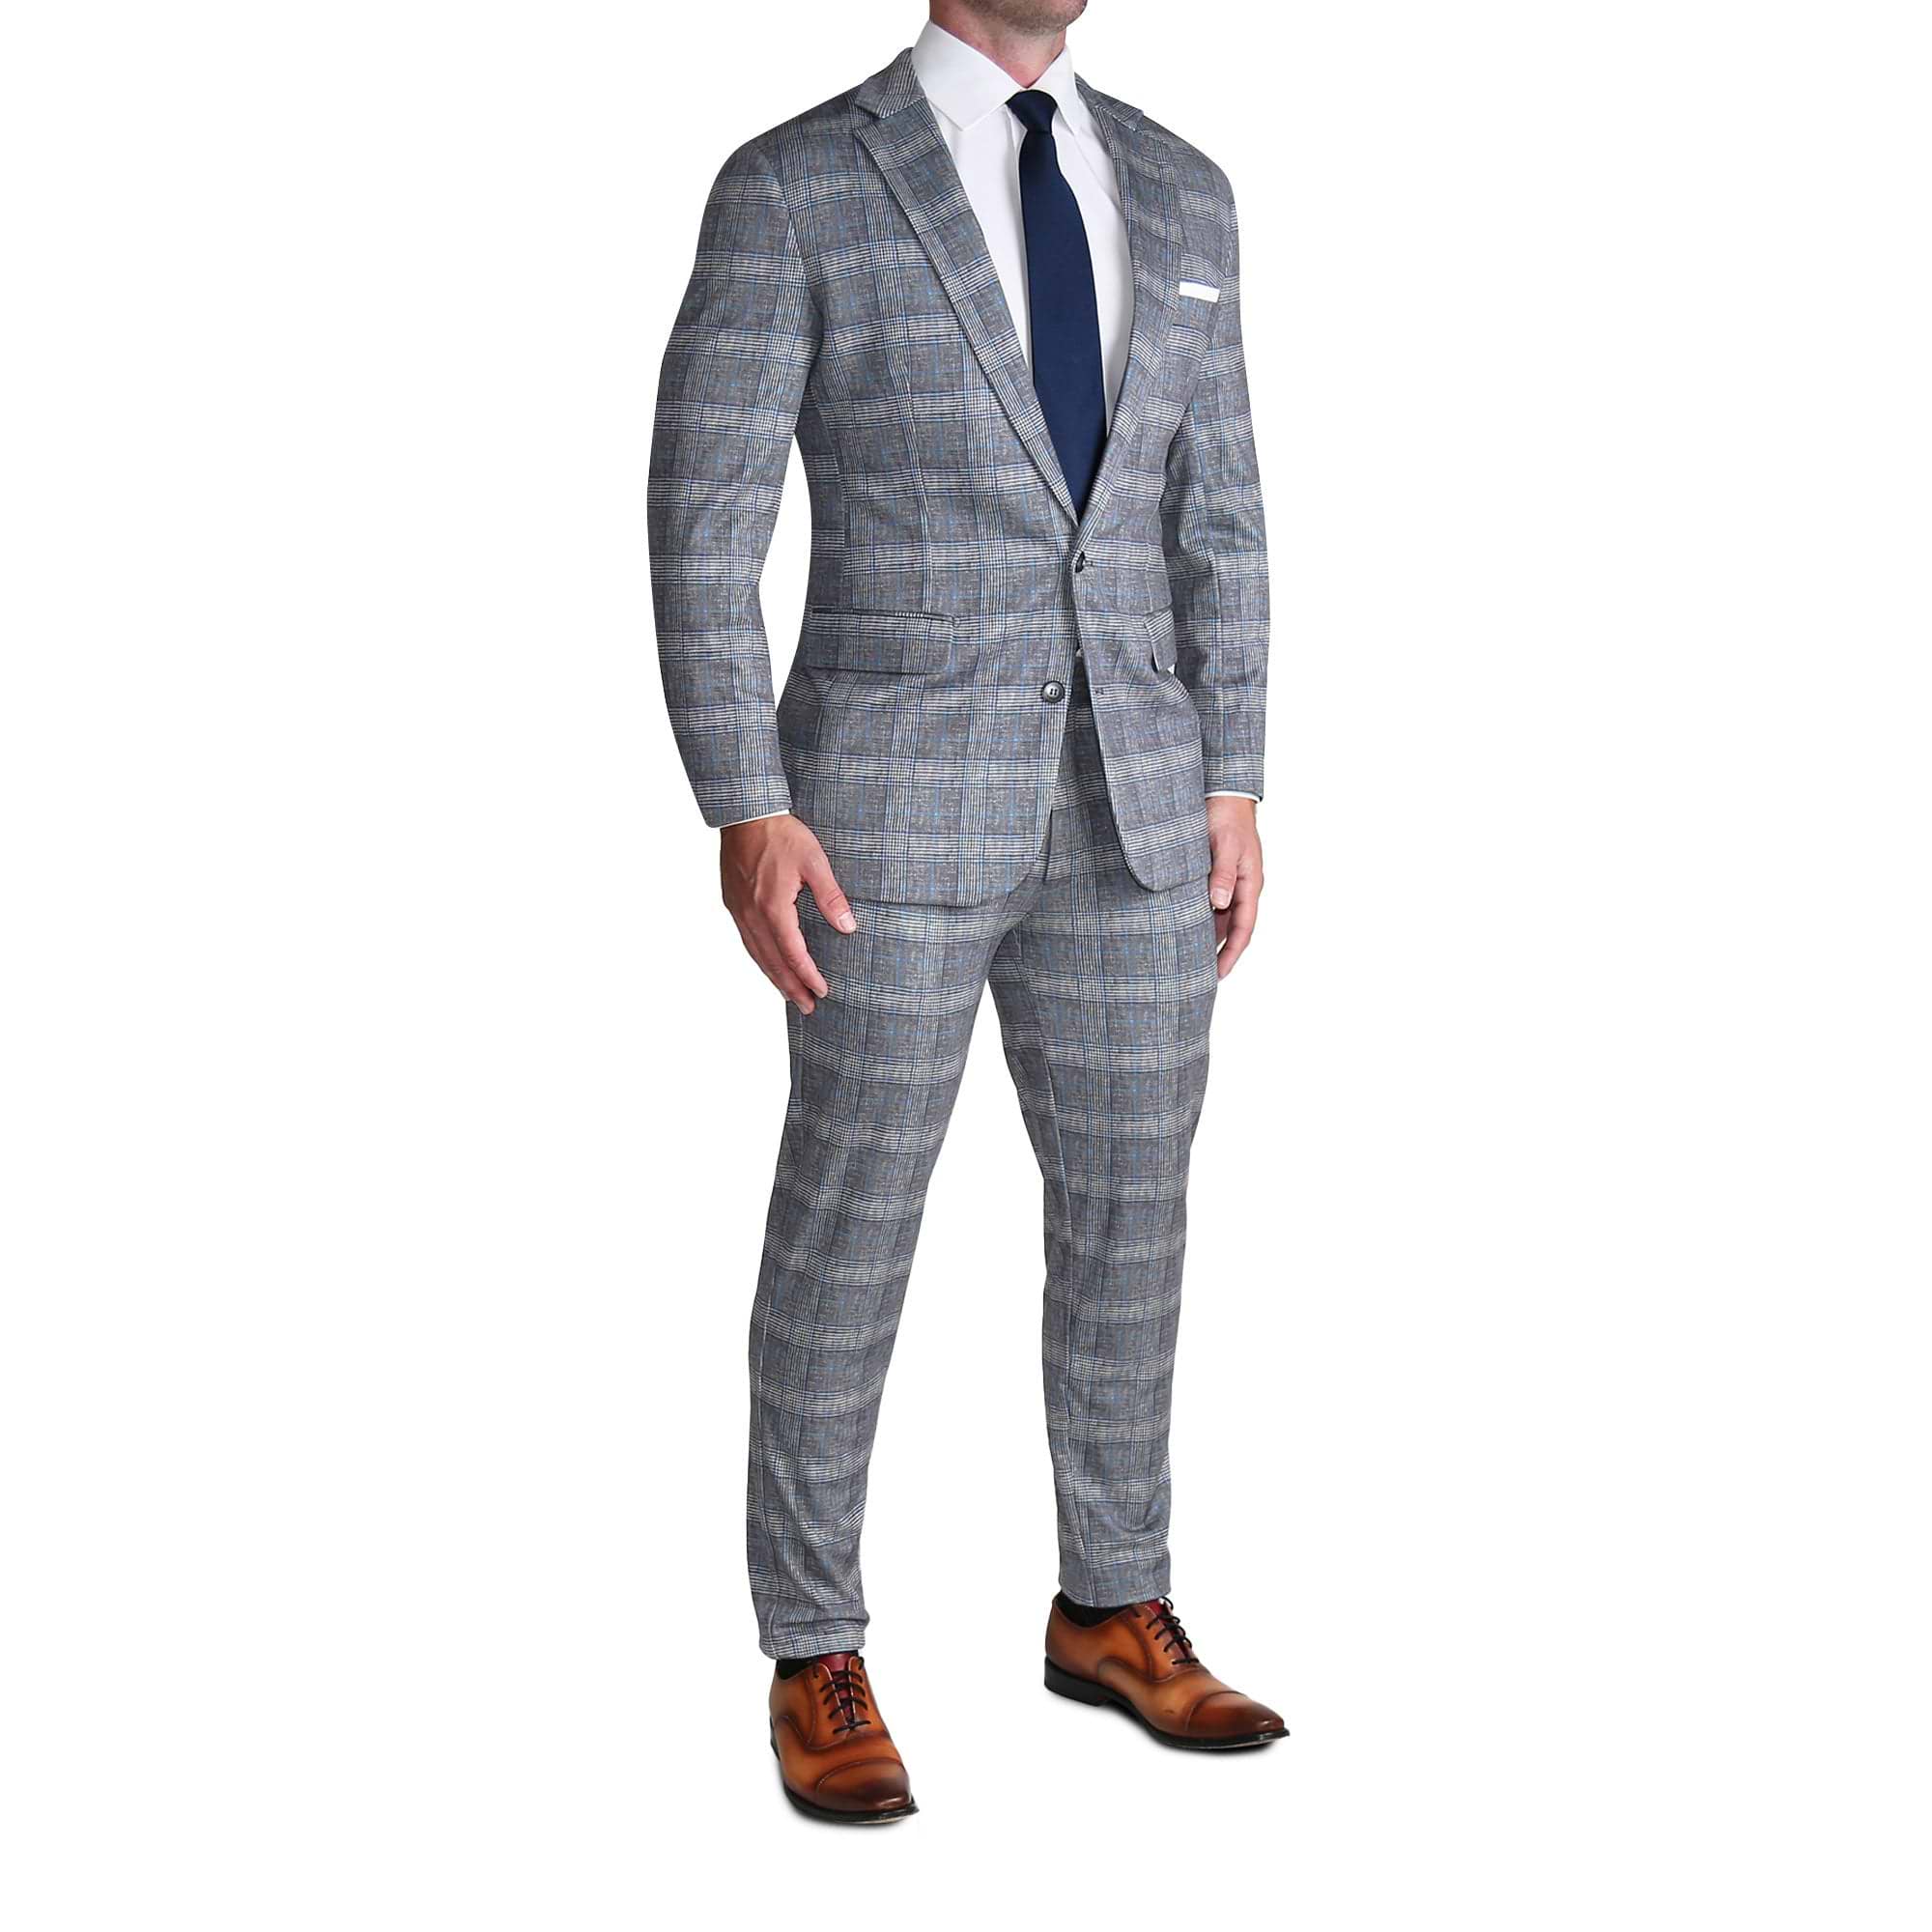 Athletic Fit Stretch Suit - Grey with Blue Plaid